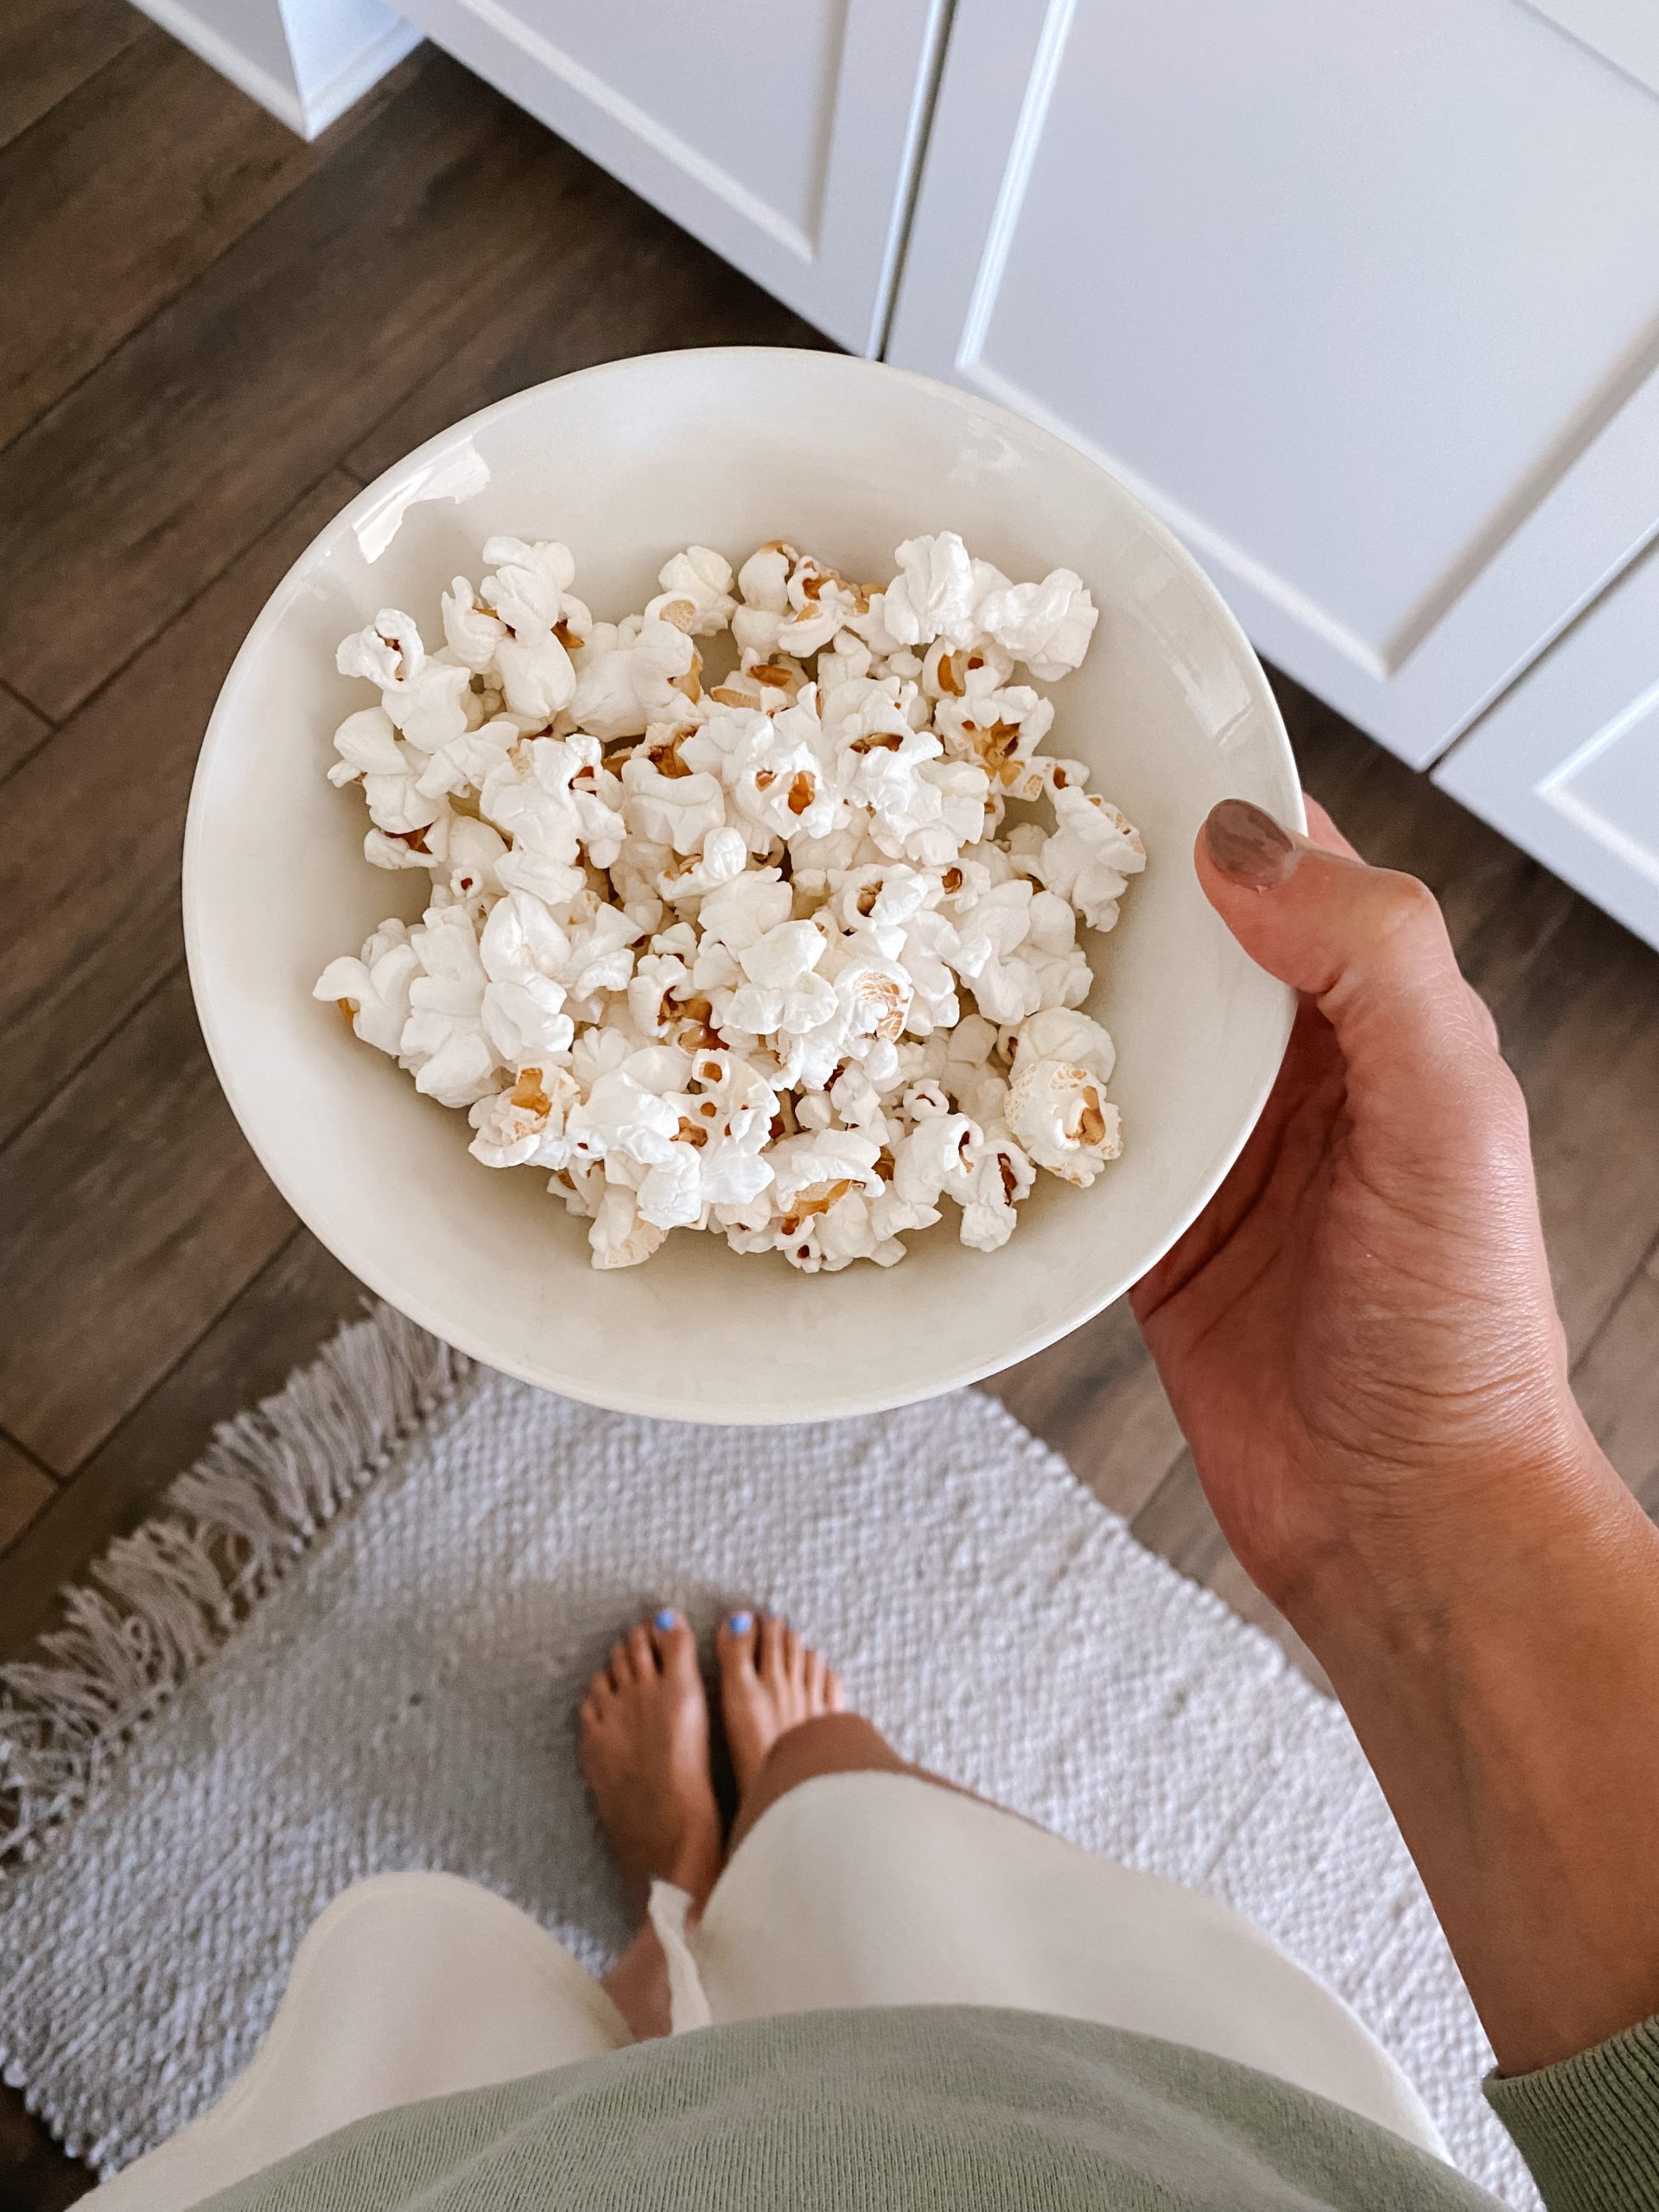 This is hands down the best stovetop popcorn recipe! With the crunchy texture and savory flavor, this tastes like movie theater popcorn, but healthier.